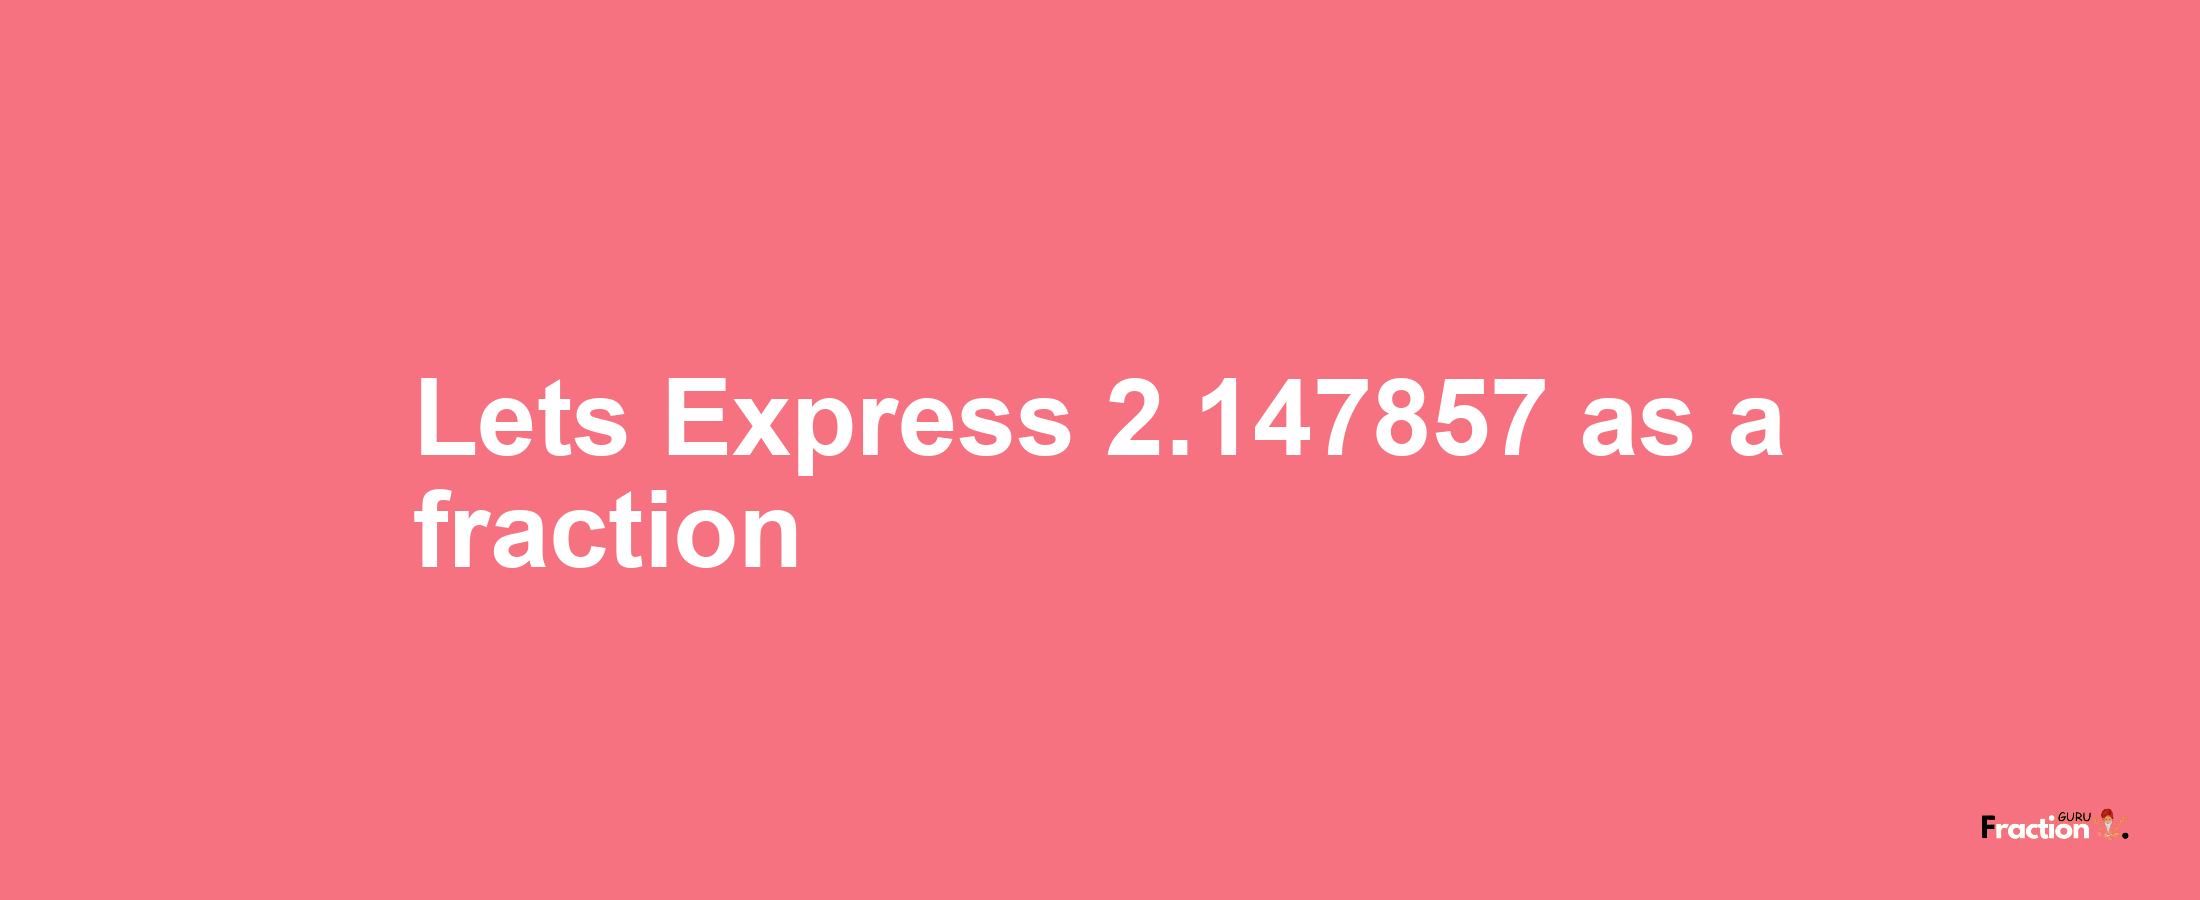 Lets Express 2.147857 as afraction